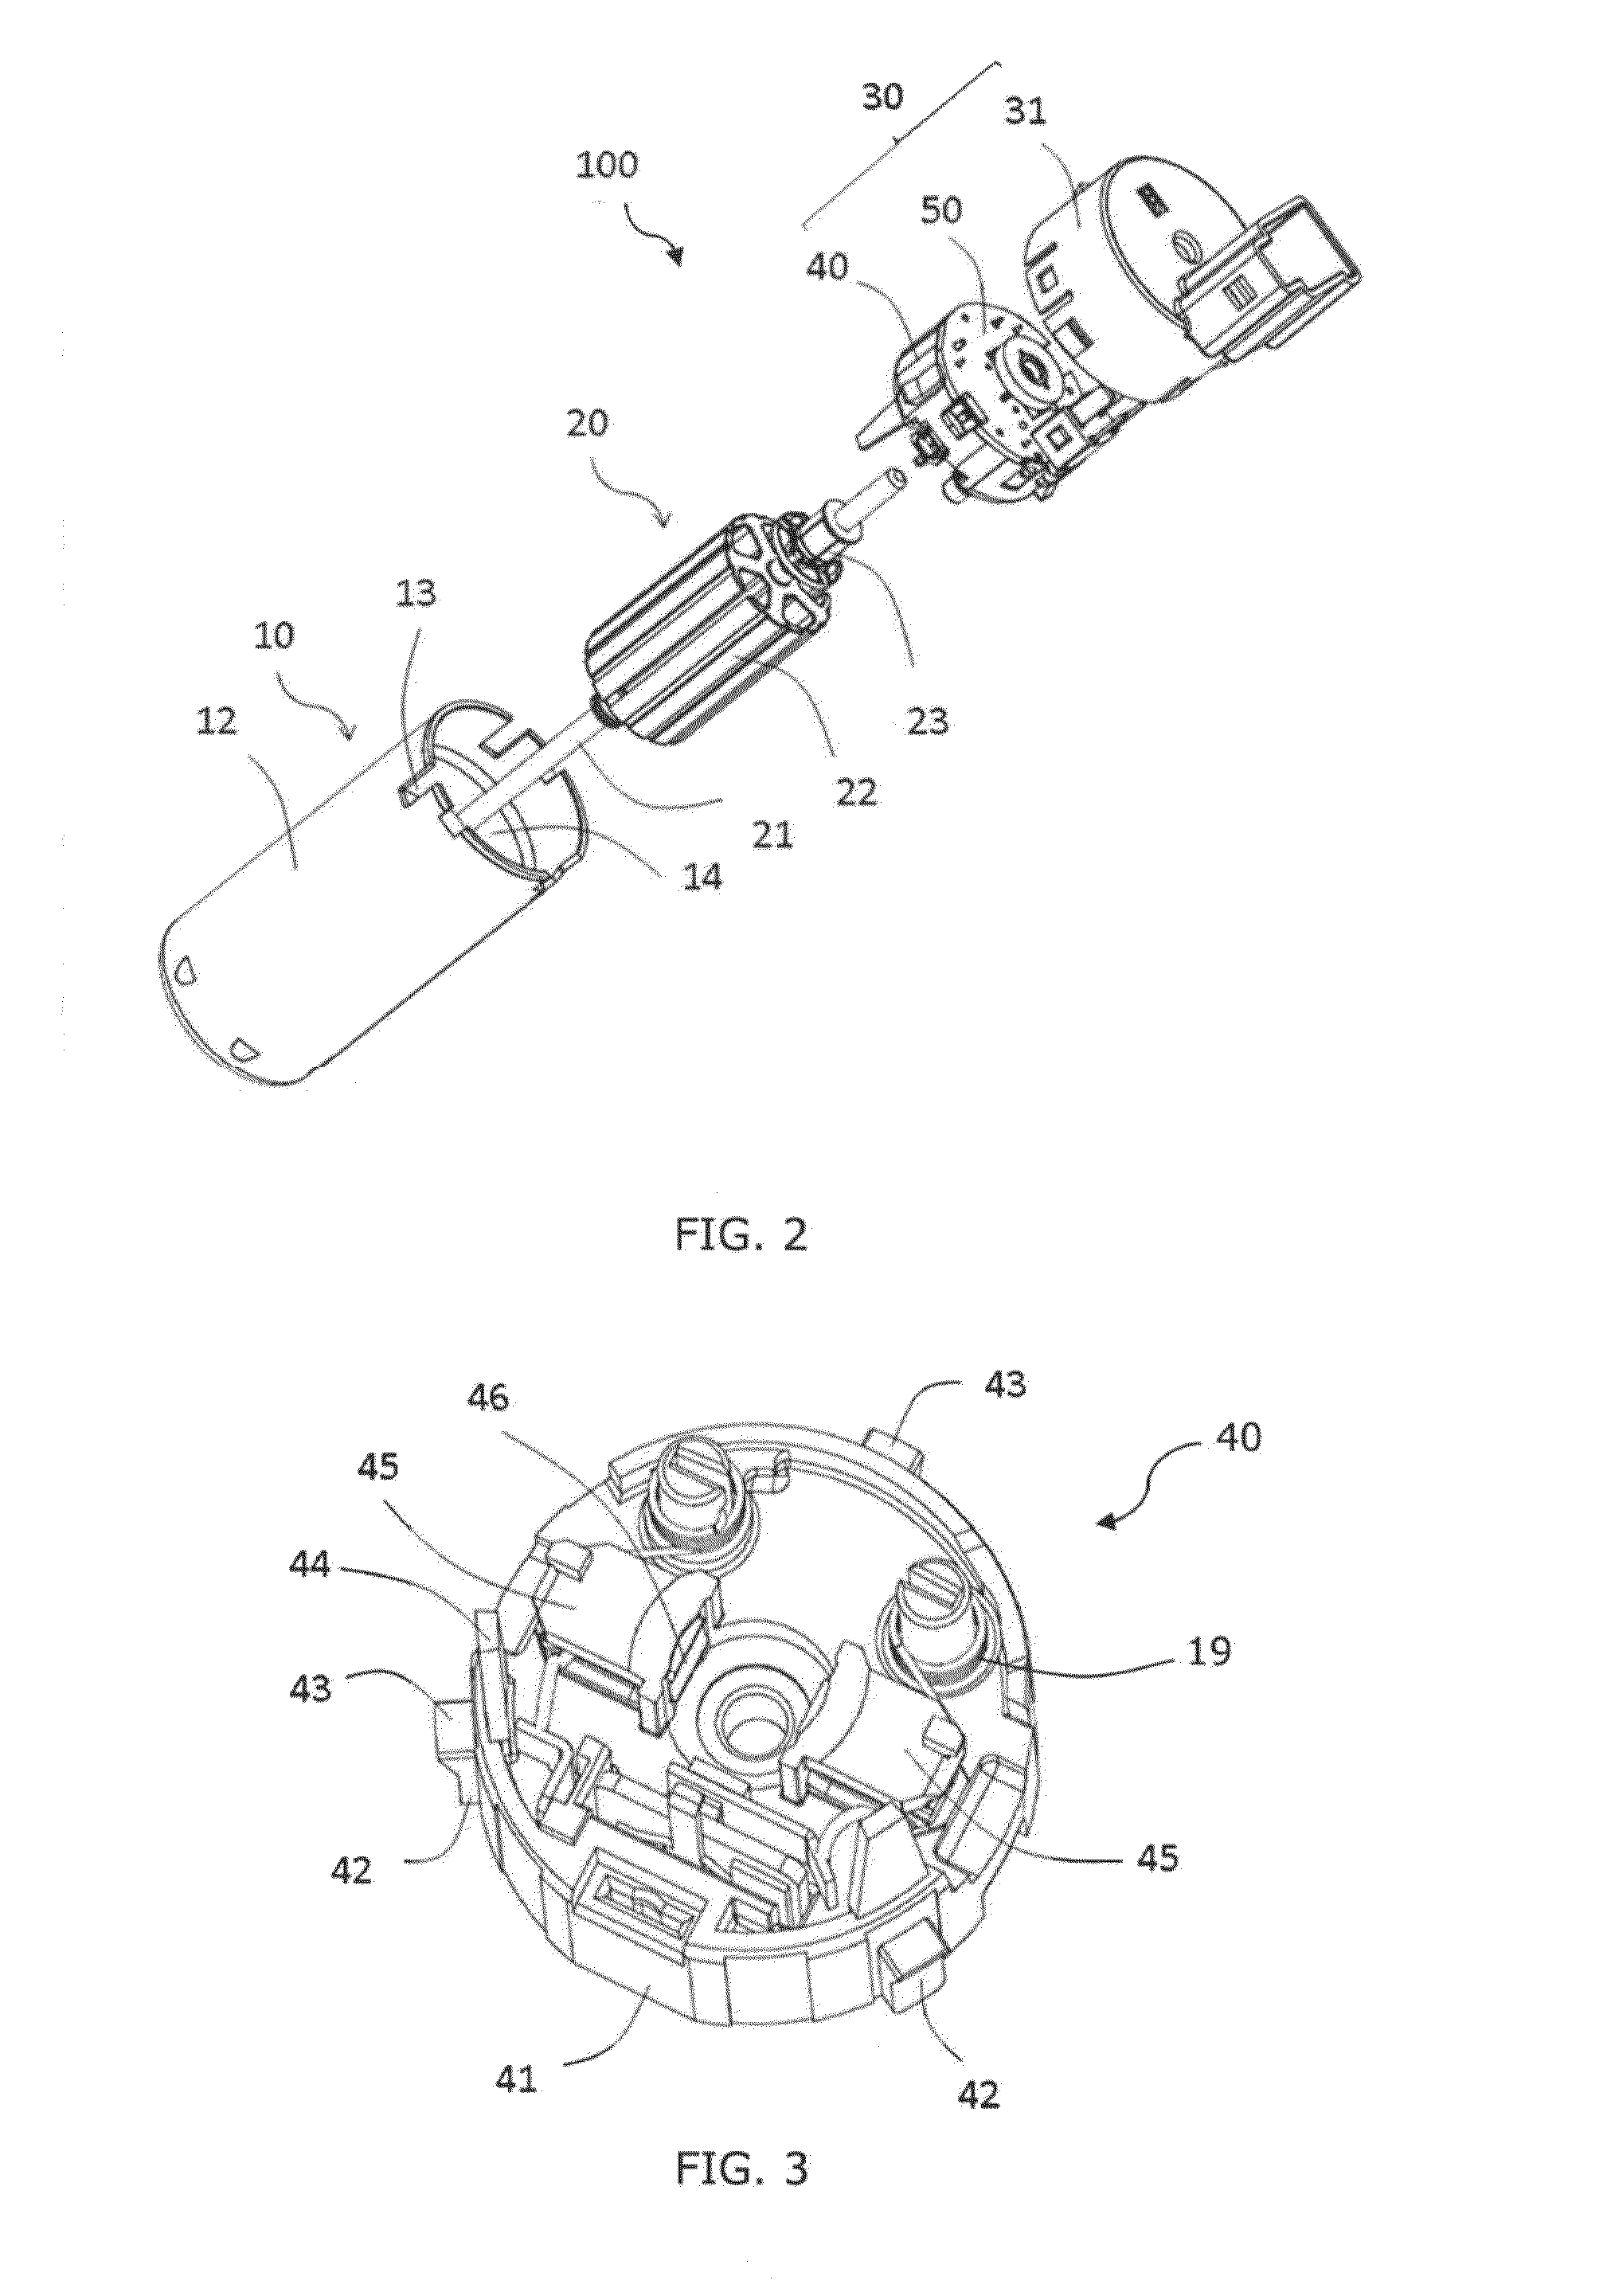 Motor and End Cap Assembly Thereof